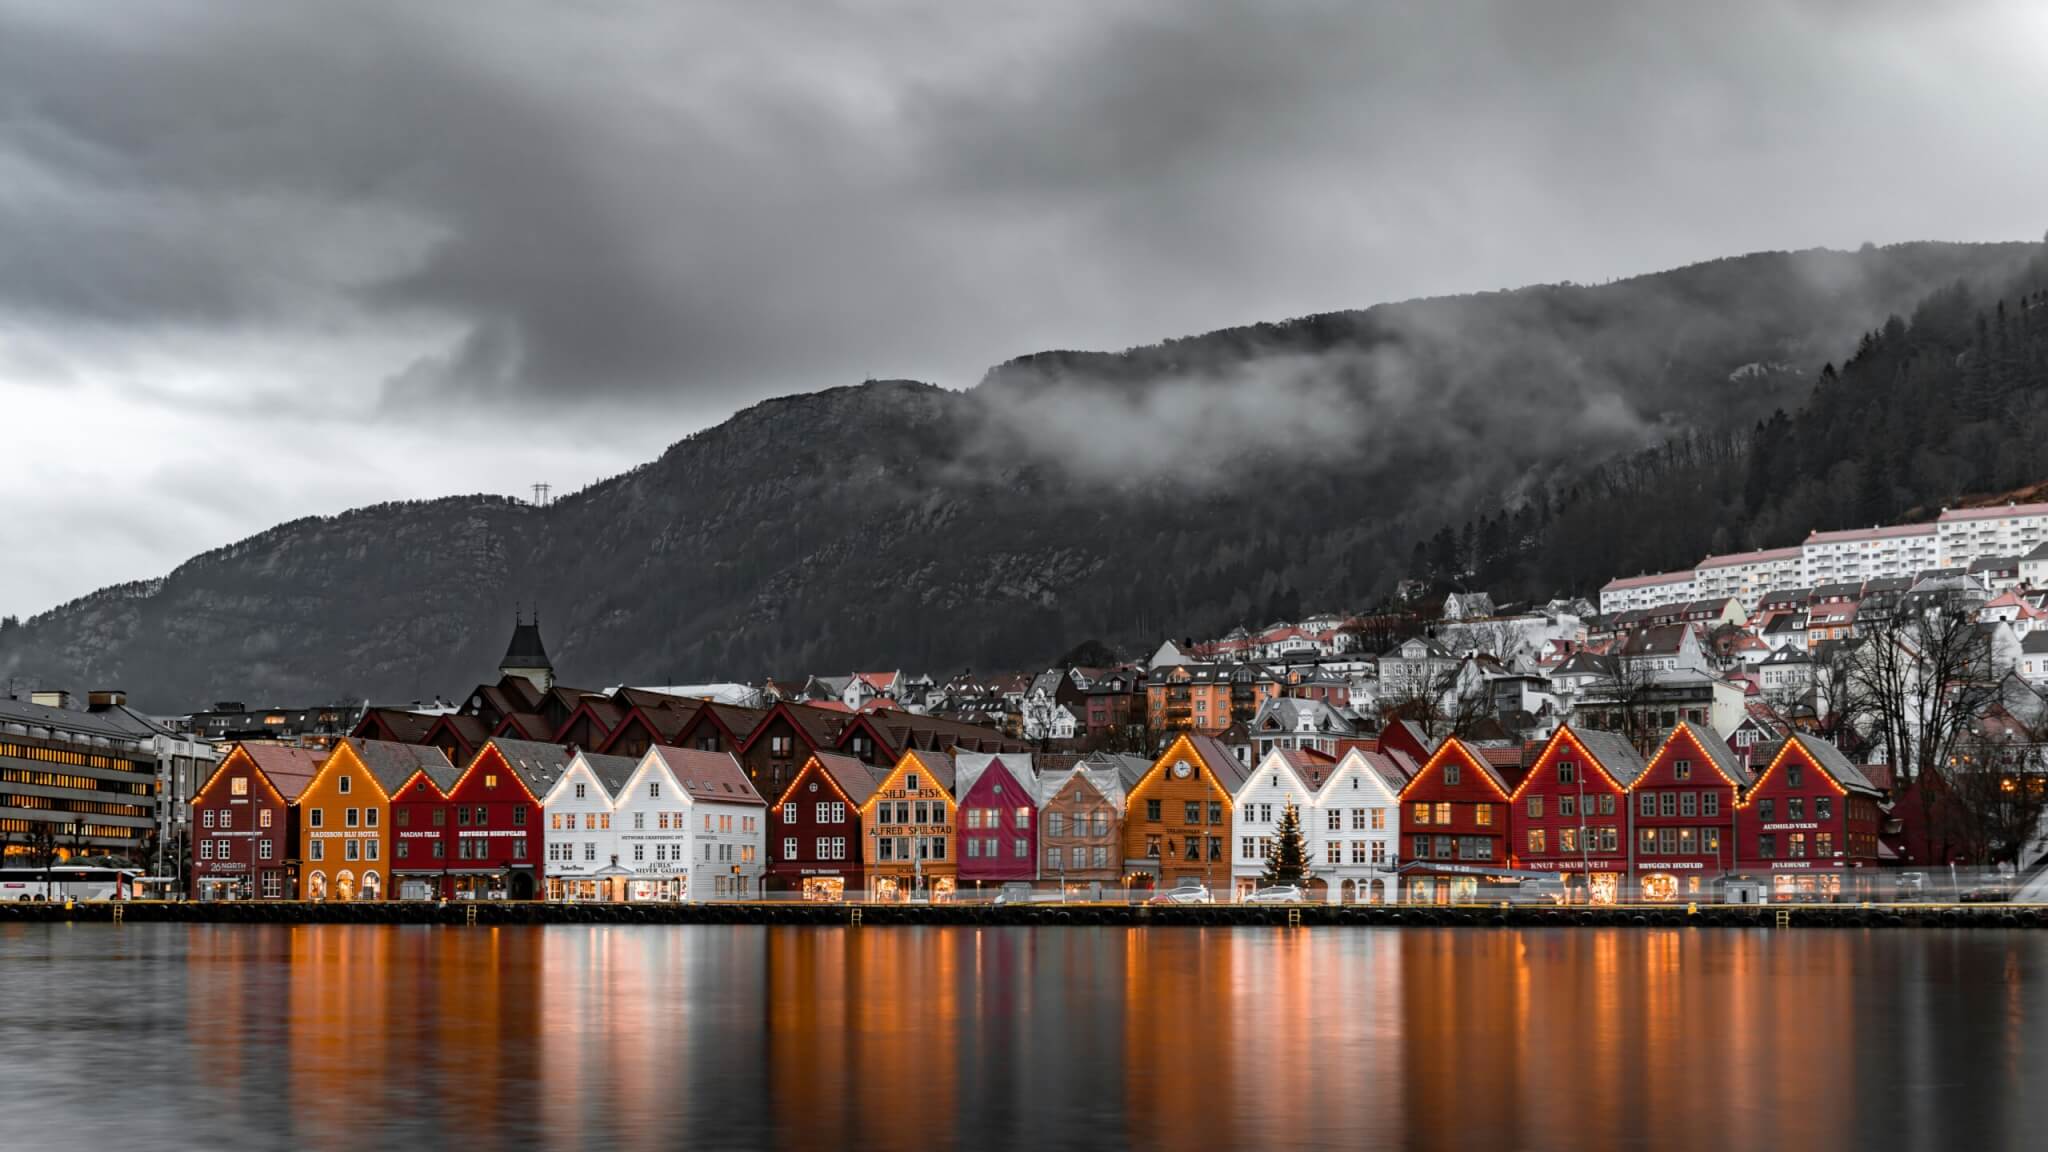 <p>This is one for the books when it comes to 60th-birthday vacation ideas. No matter your port of call, there's a luxury cruise liner eager to take you to the star of Scandinavia. </p> <p>Consider sailing through some of the most stunning fjords like Nærøyfjord, a UNESCO-listed site, on an electric-powered vessel. If you can find a ferry cruise between Geiranger and Hellesylt, you'll stand in wonder and quickly see why these fjords are listed as World Heritage Sites. </p> <p>Along the way, you'll also visit historic cities like Bergen or Ålesund, the Venice of Norway. Stavanger is another famous city known for its natural beauty and cultural charm. Only 25 km east, you may also find yourself cruising through Lysefjord, a major attraction for part of the country. </p>